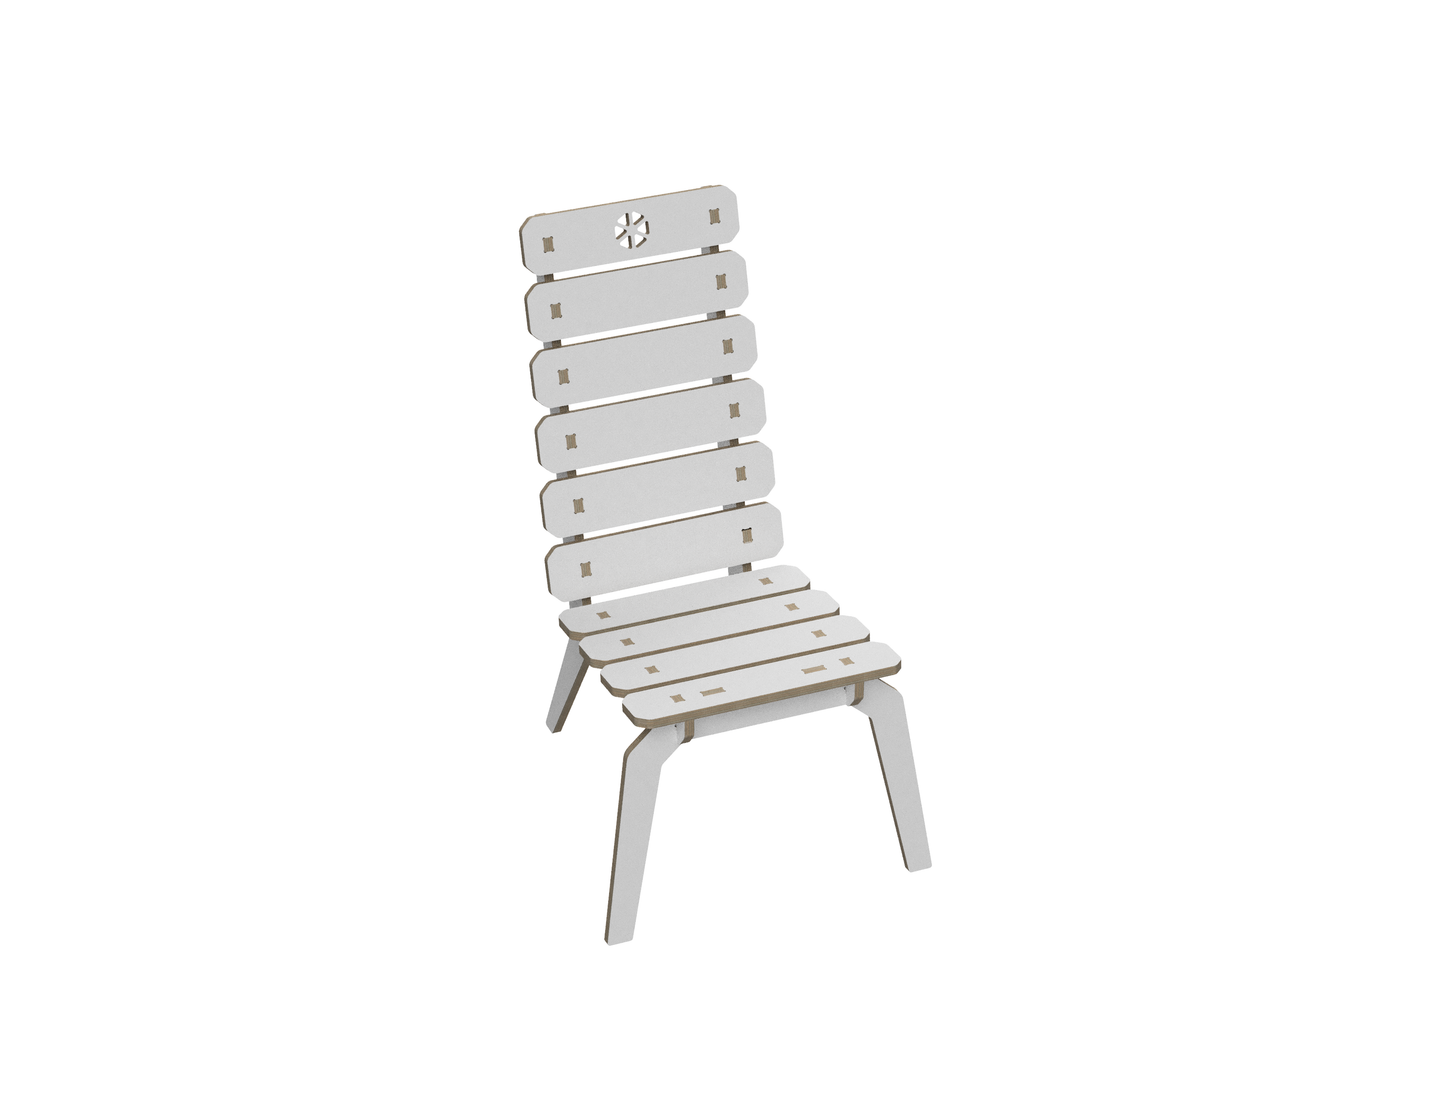 Lounge chair DXF file